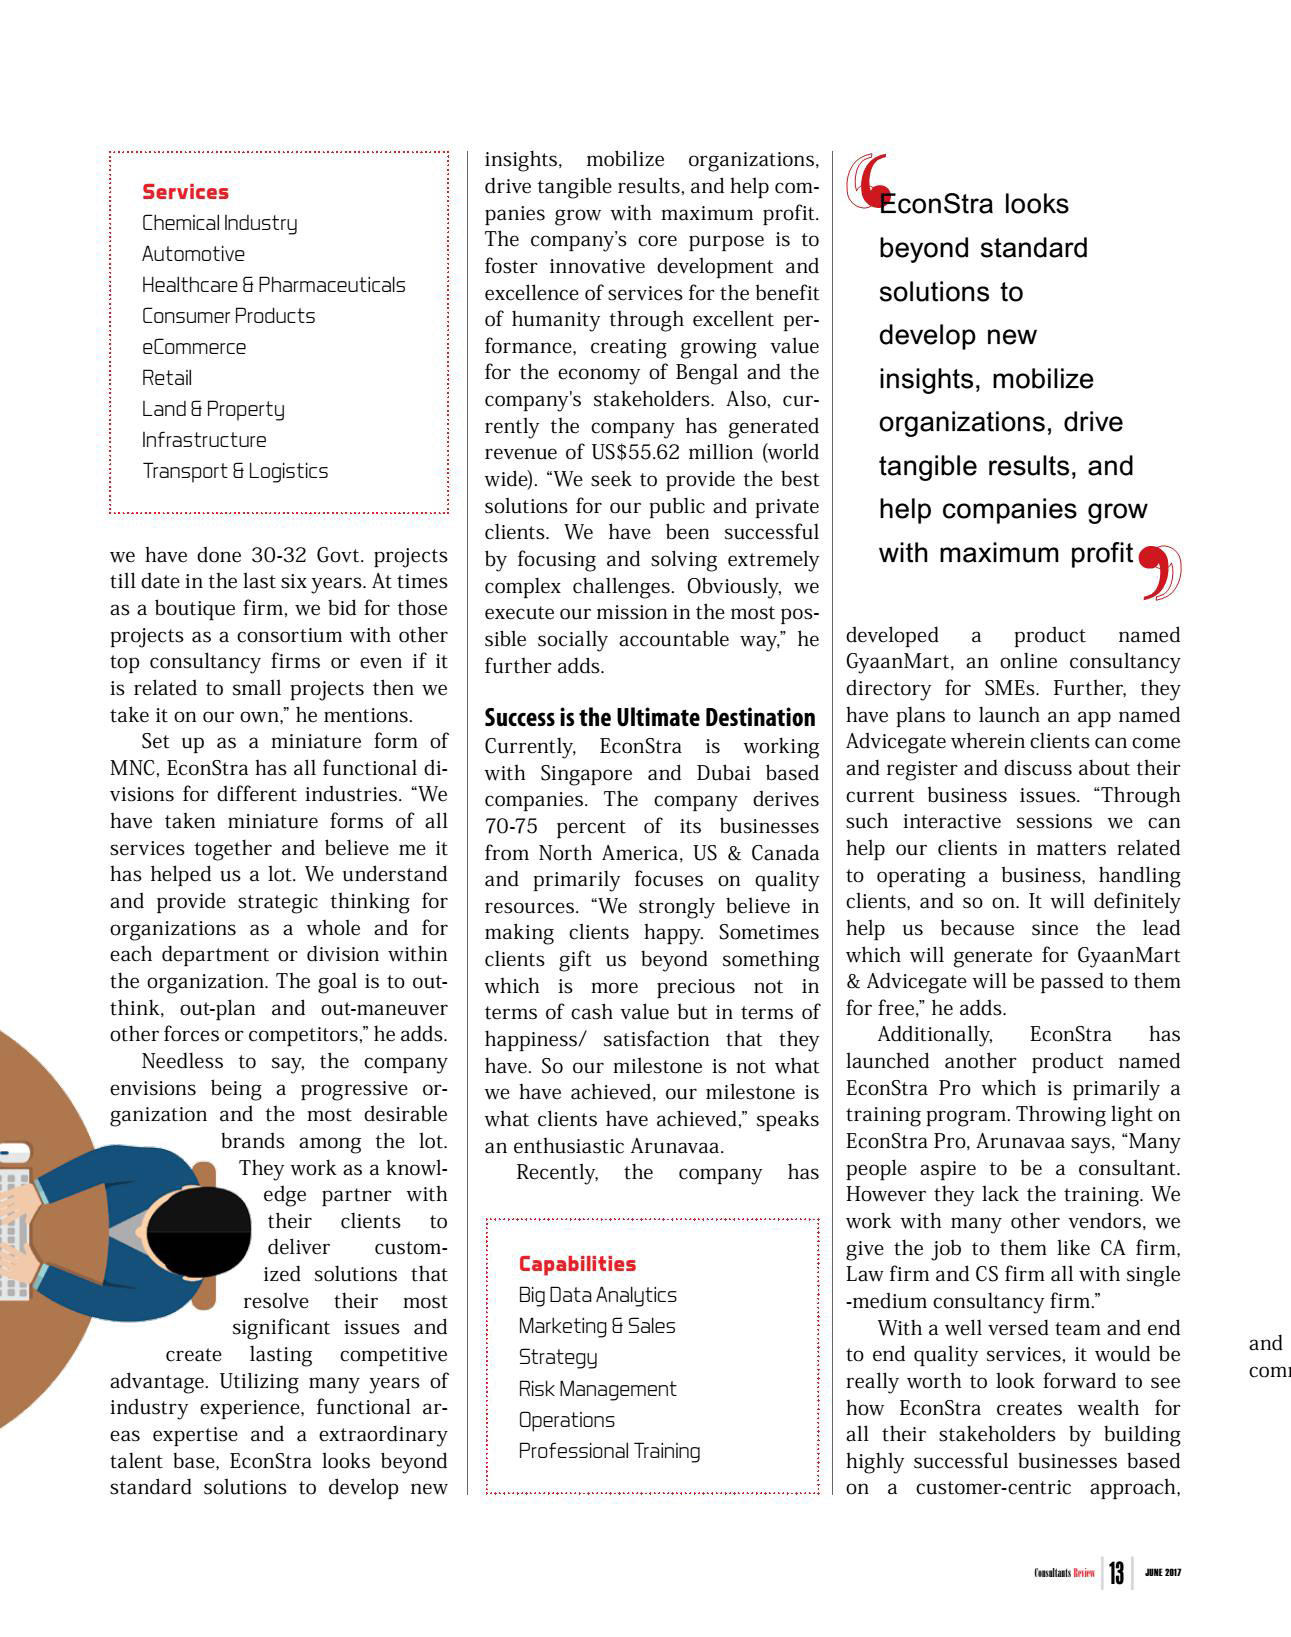 EconStra in Consultant Review Magazine 004